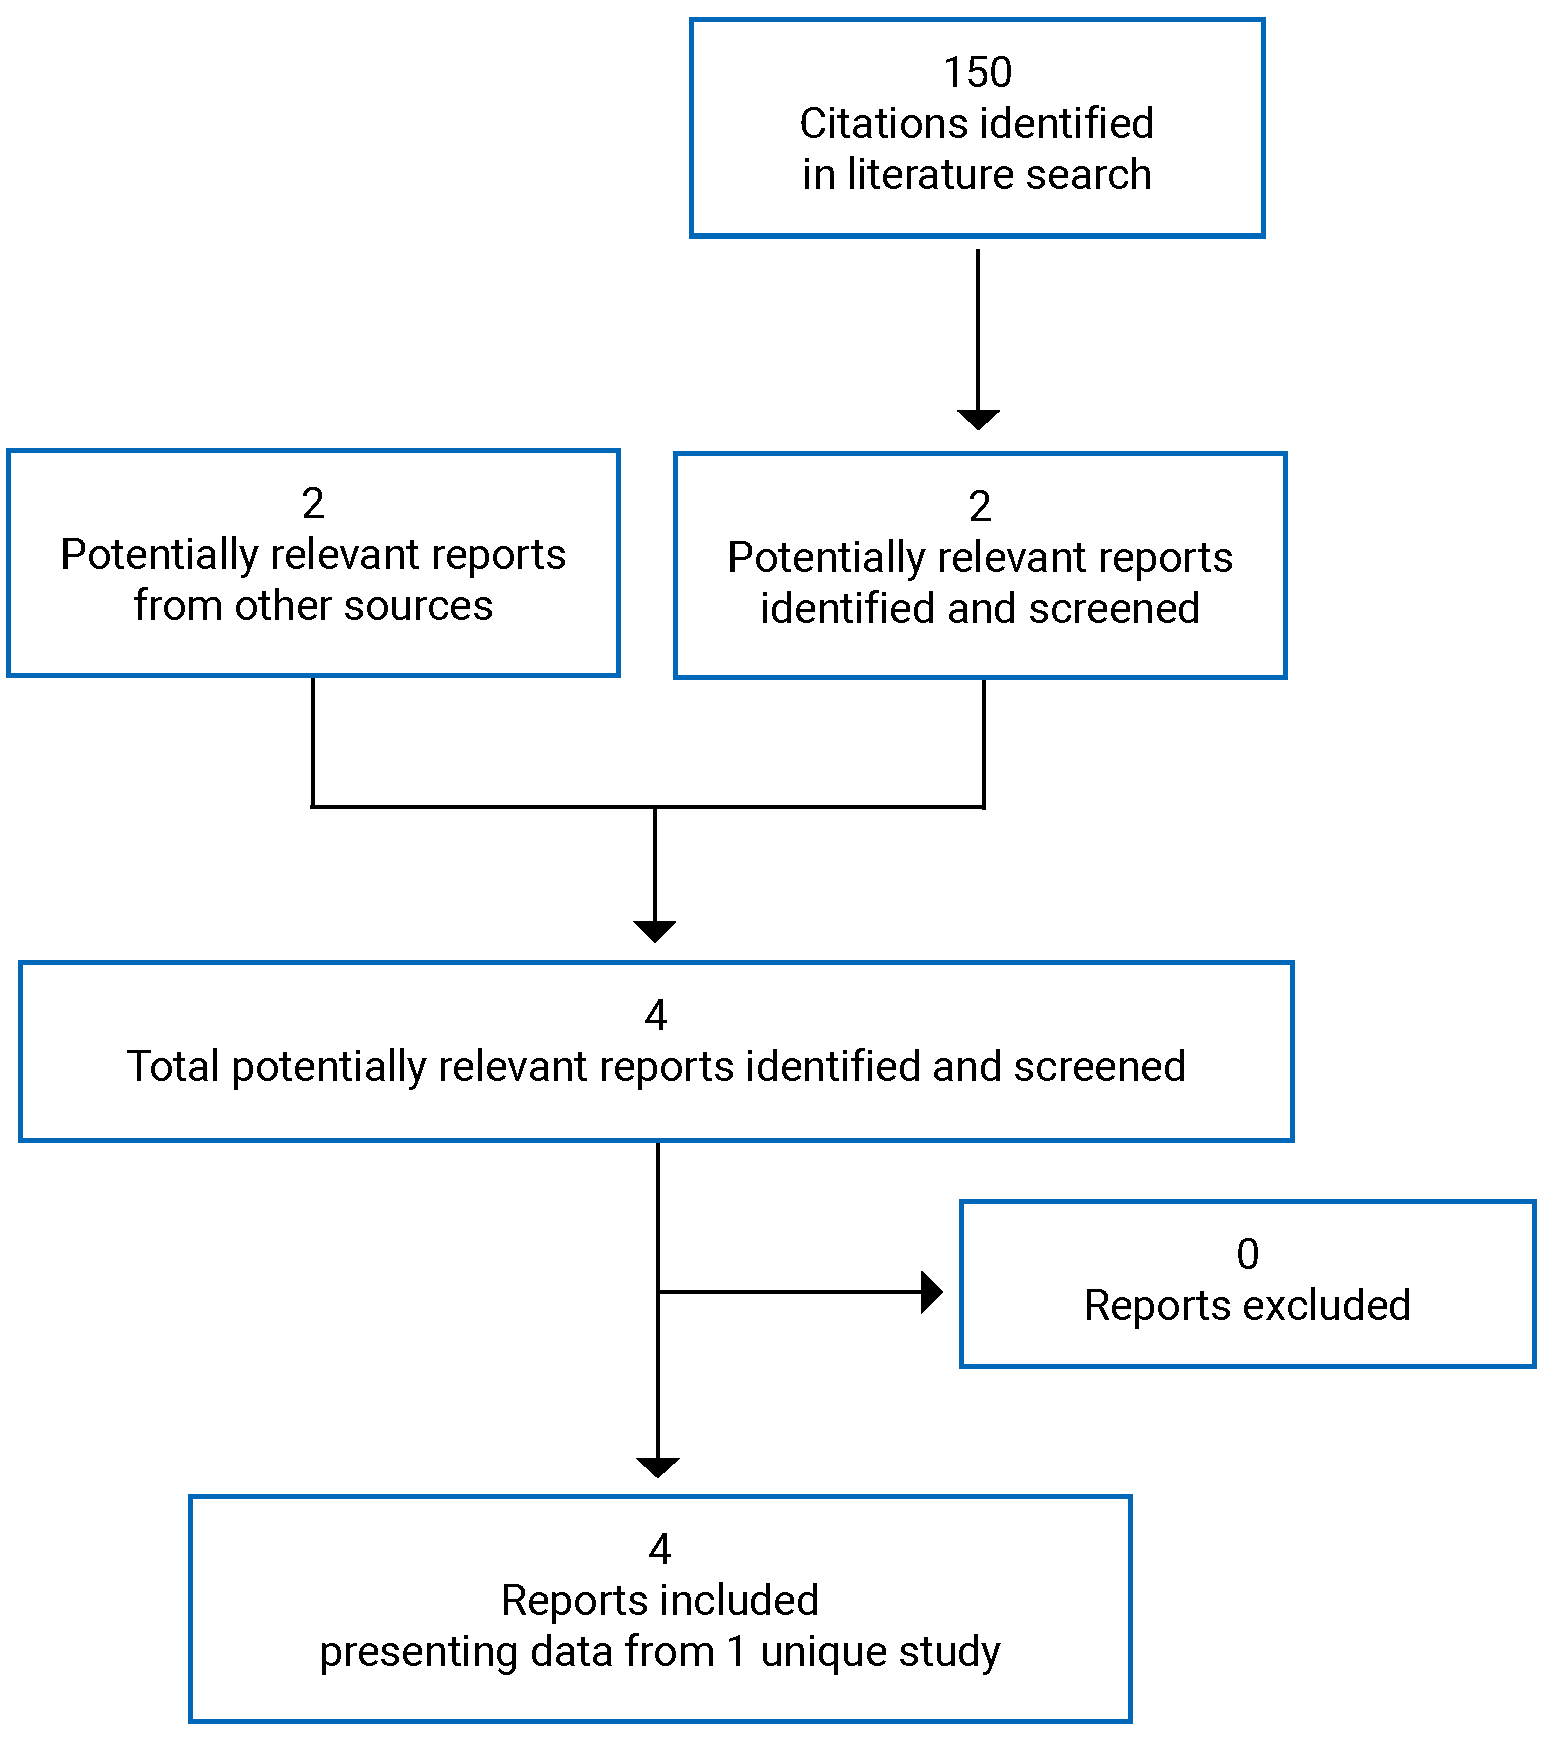 A total of 150 citations were identified in the literature search, of which 2 potentially relevant reports were identified and screened. There were 2 additional potentially relevant reports from other sources. All 4 reports presenting data from 1 unique study were included in the review.